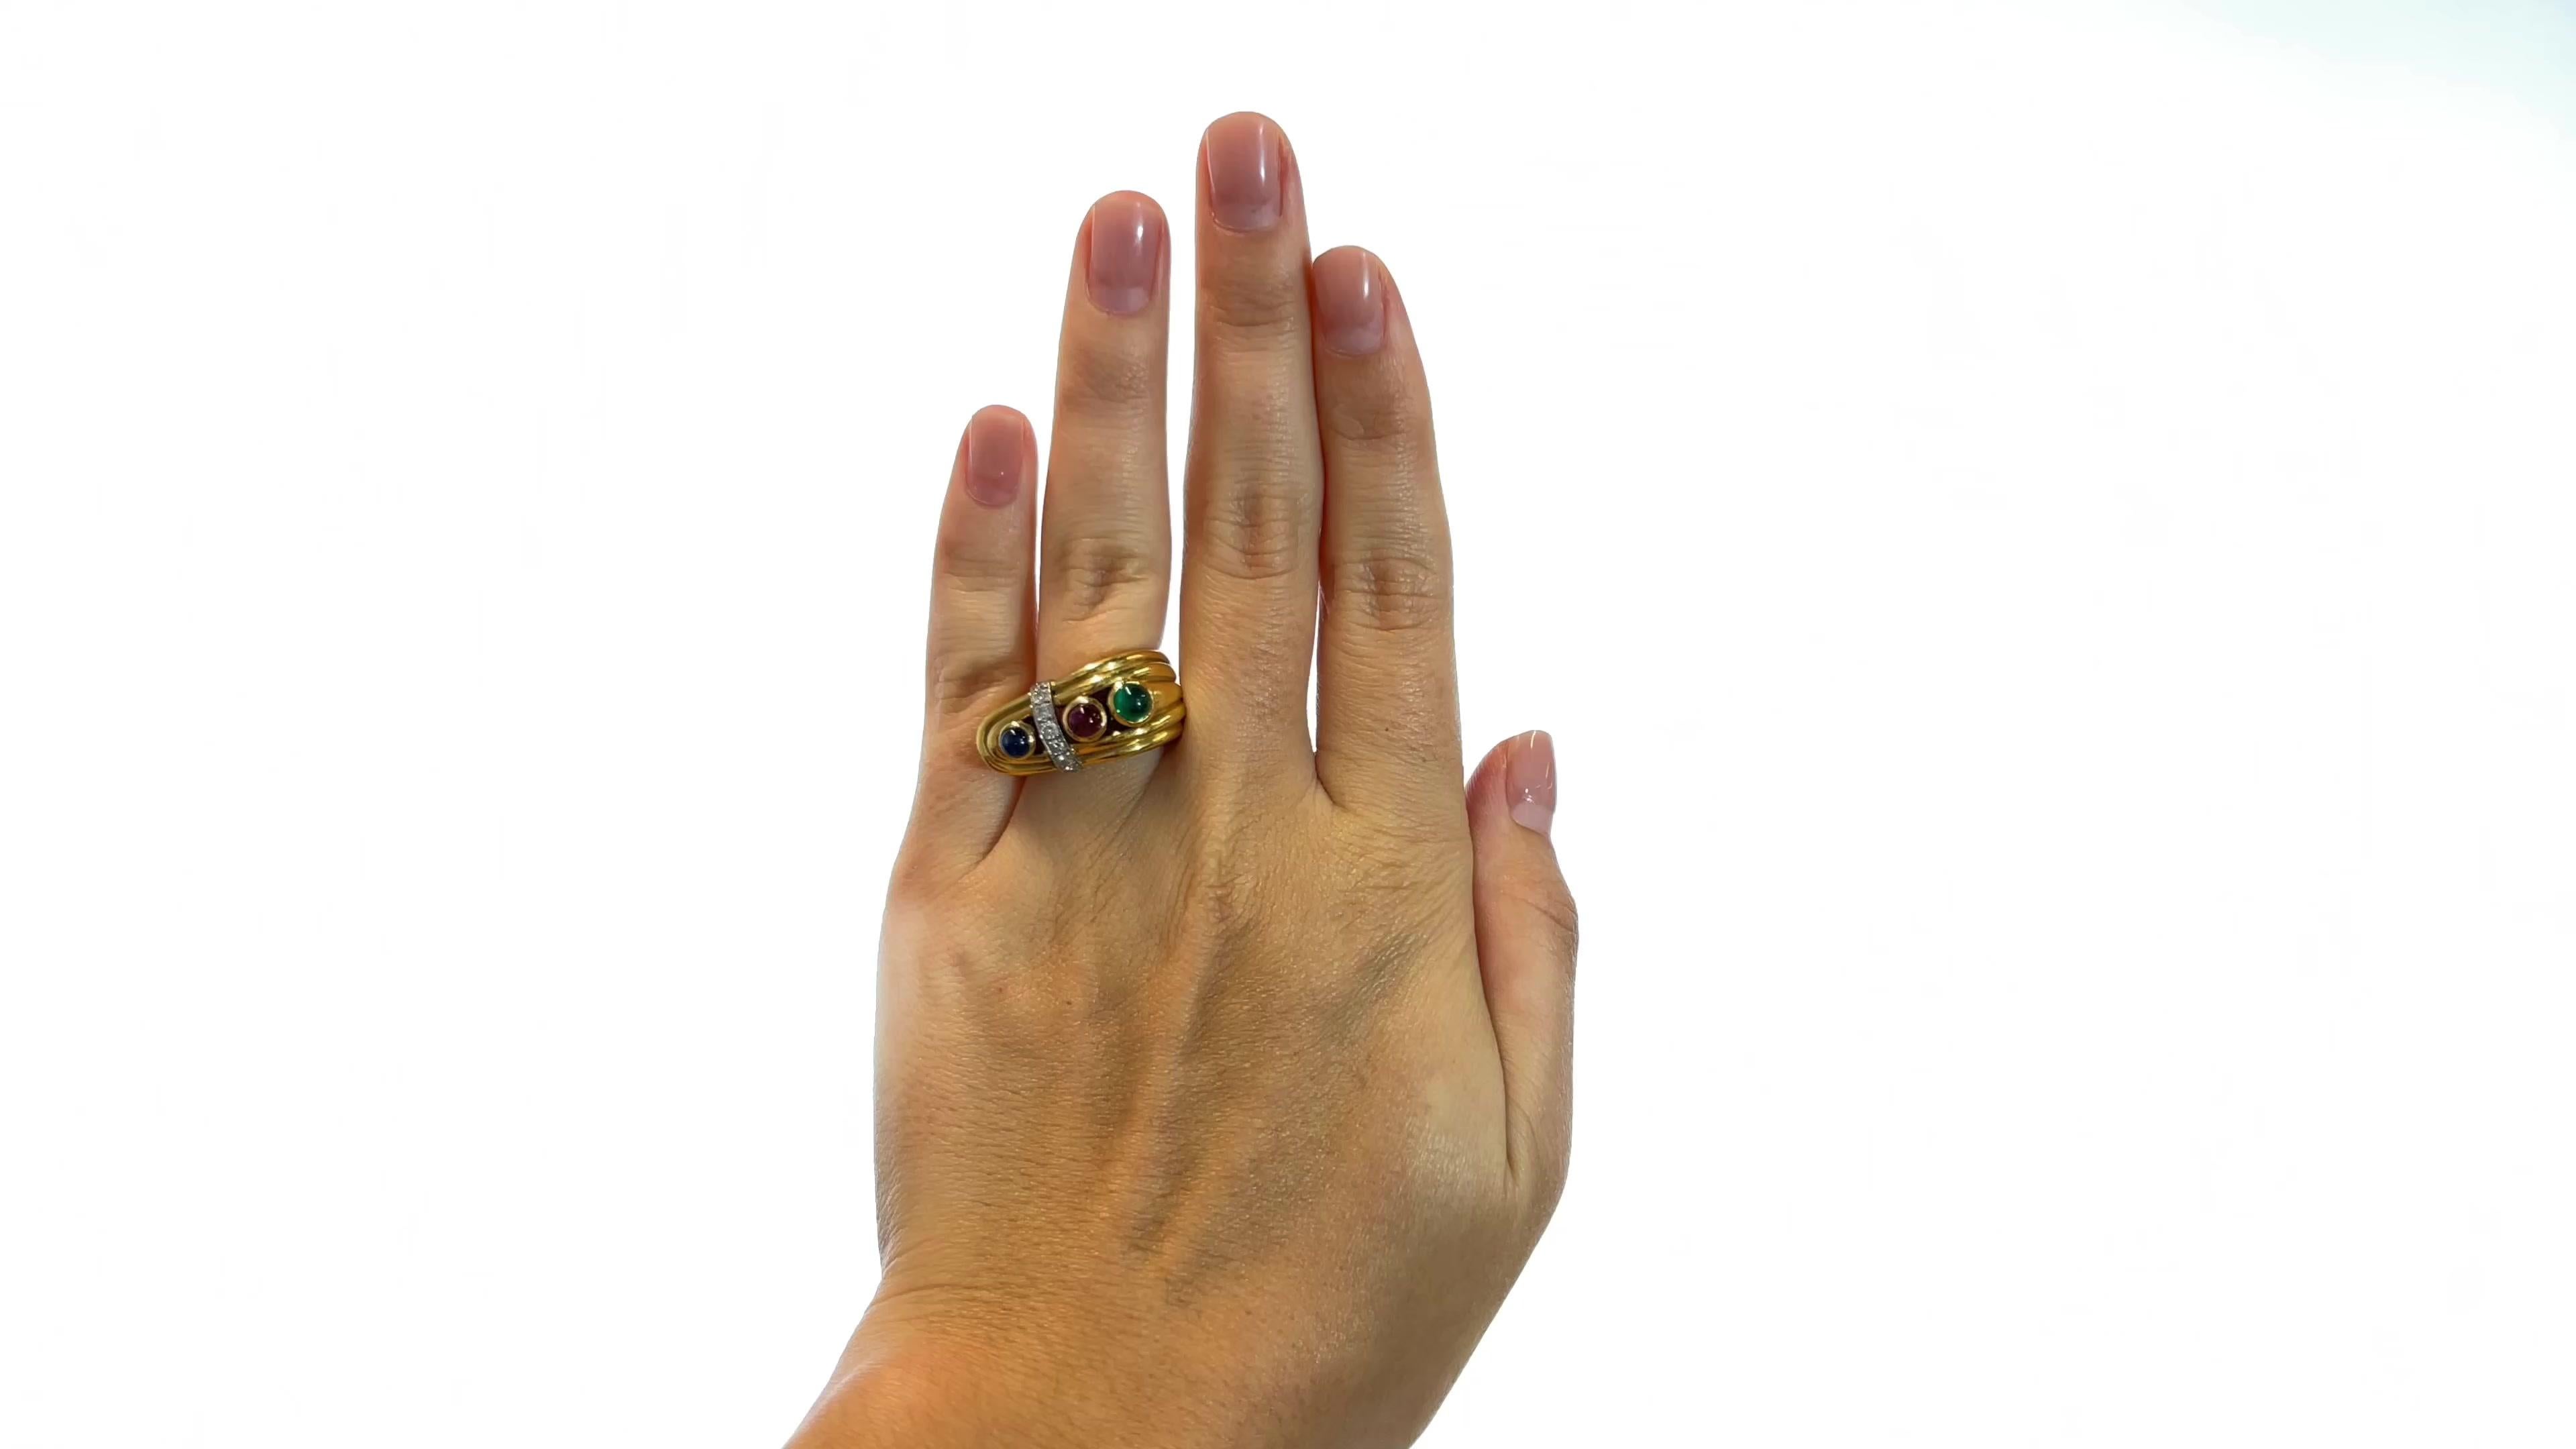 One Vintage David Webb Gemstone 18k Gold Ring. Featuring one cabochon sapphire weighing approximately 0.51 carat, one cabochon ruby weighing approximately 0.46 carat, and one cabochon emerald weighing 0.70 carat. Accented by seven round brilliant